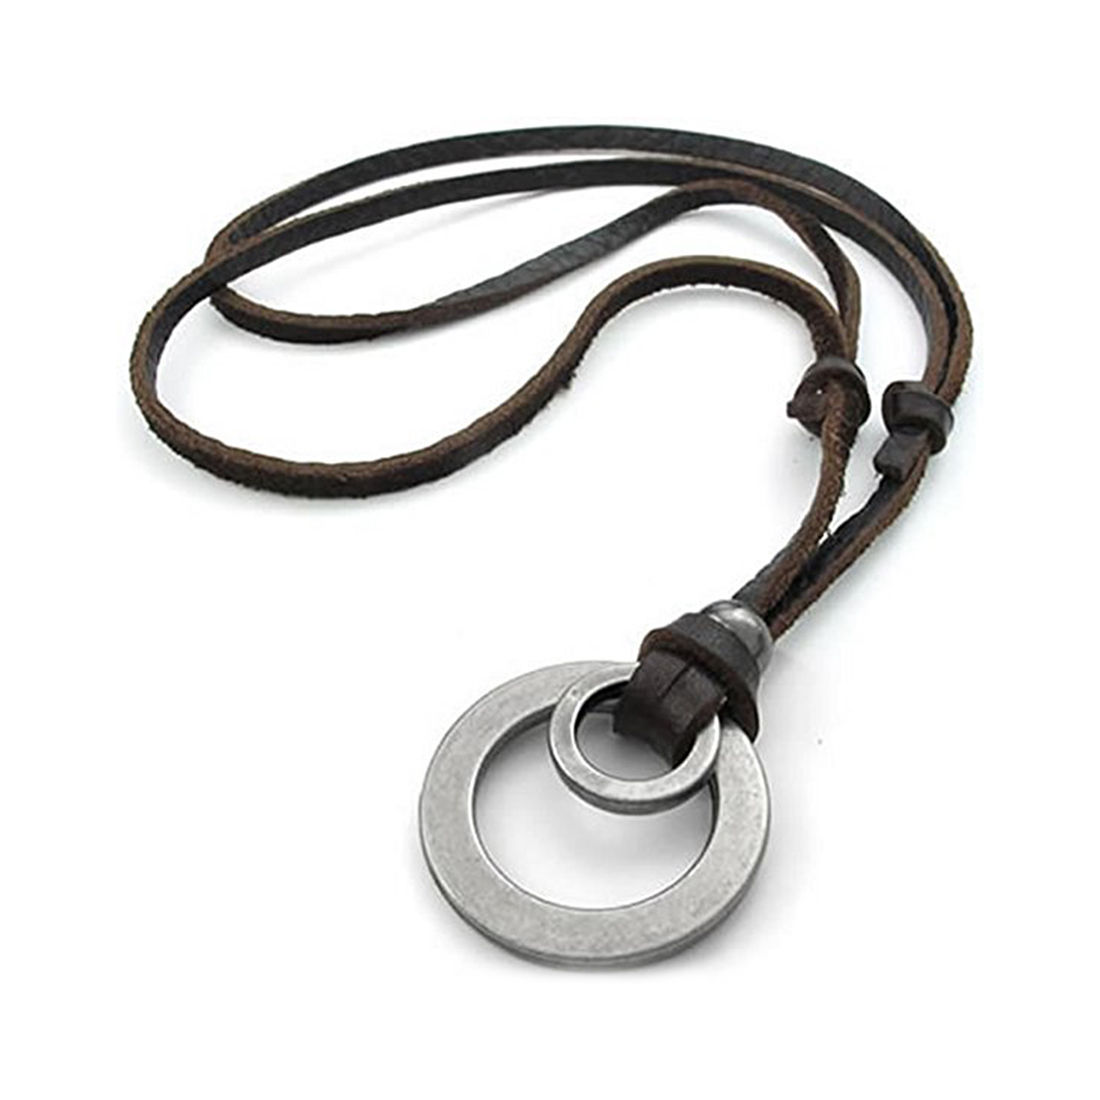 Men's Three Circle Necklace / Solid Sterling Silver / Rustic Hammer Forged  Circles / Adjustable Leather Cord